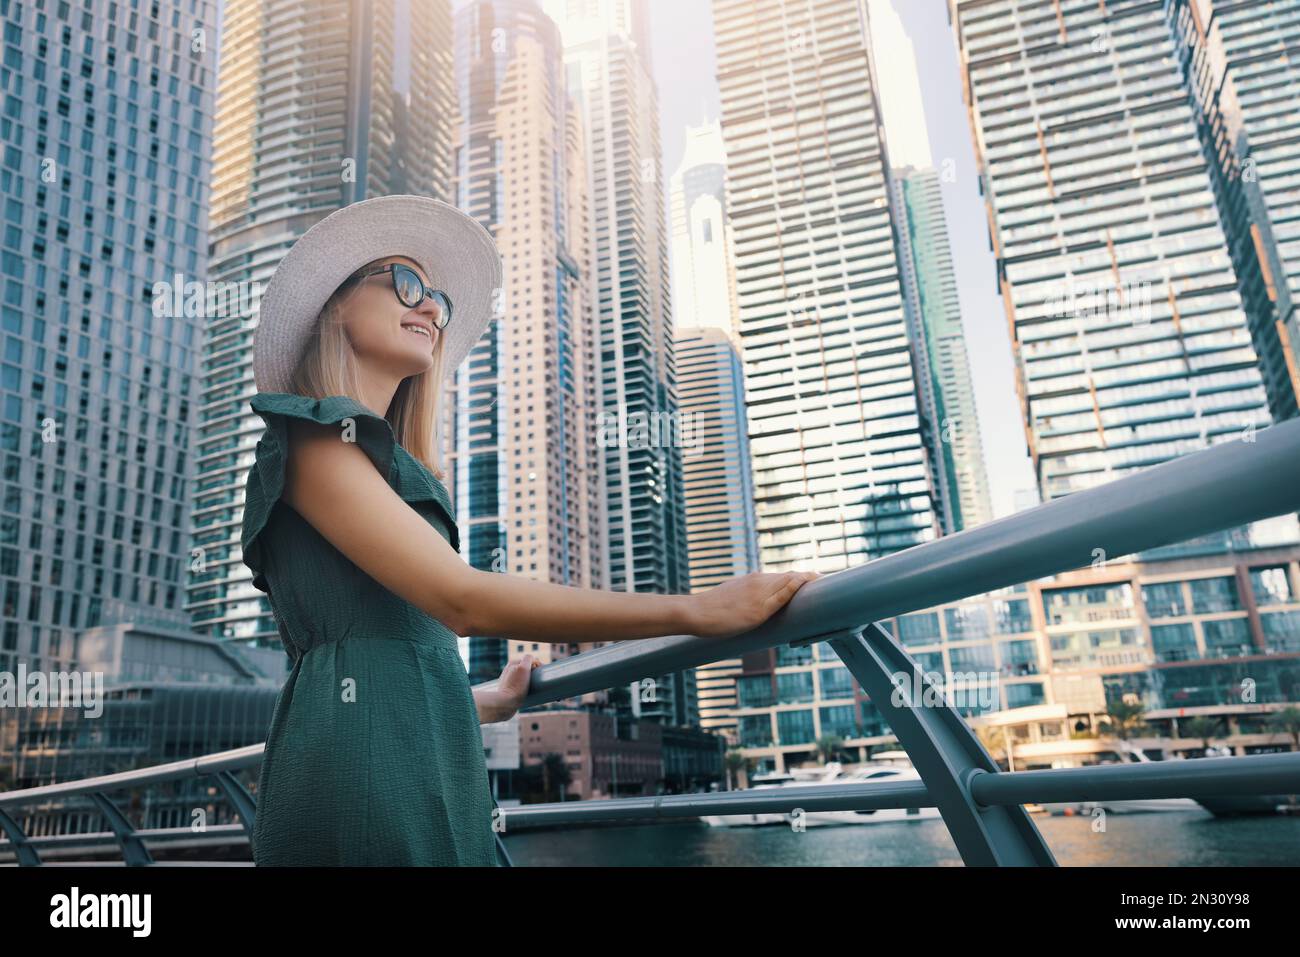 woman in fashionable summer dress and hat enjoying Dubai marina views with skyscrapers in United Arab Emirates Stock Photo